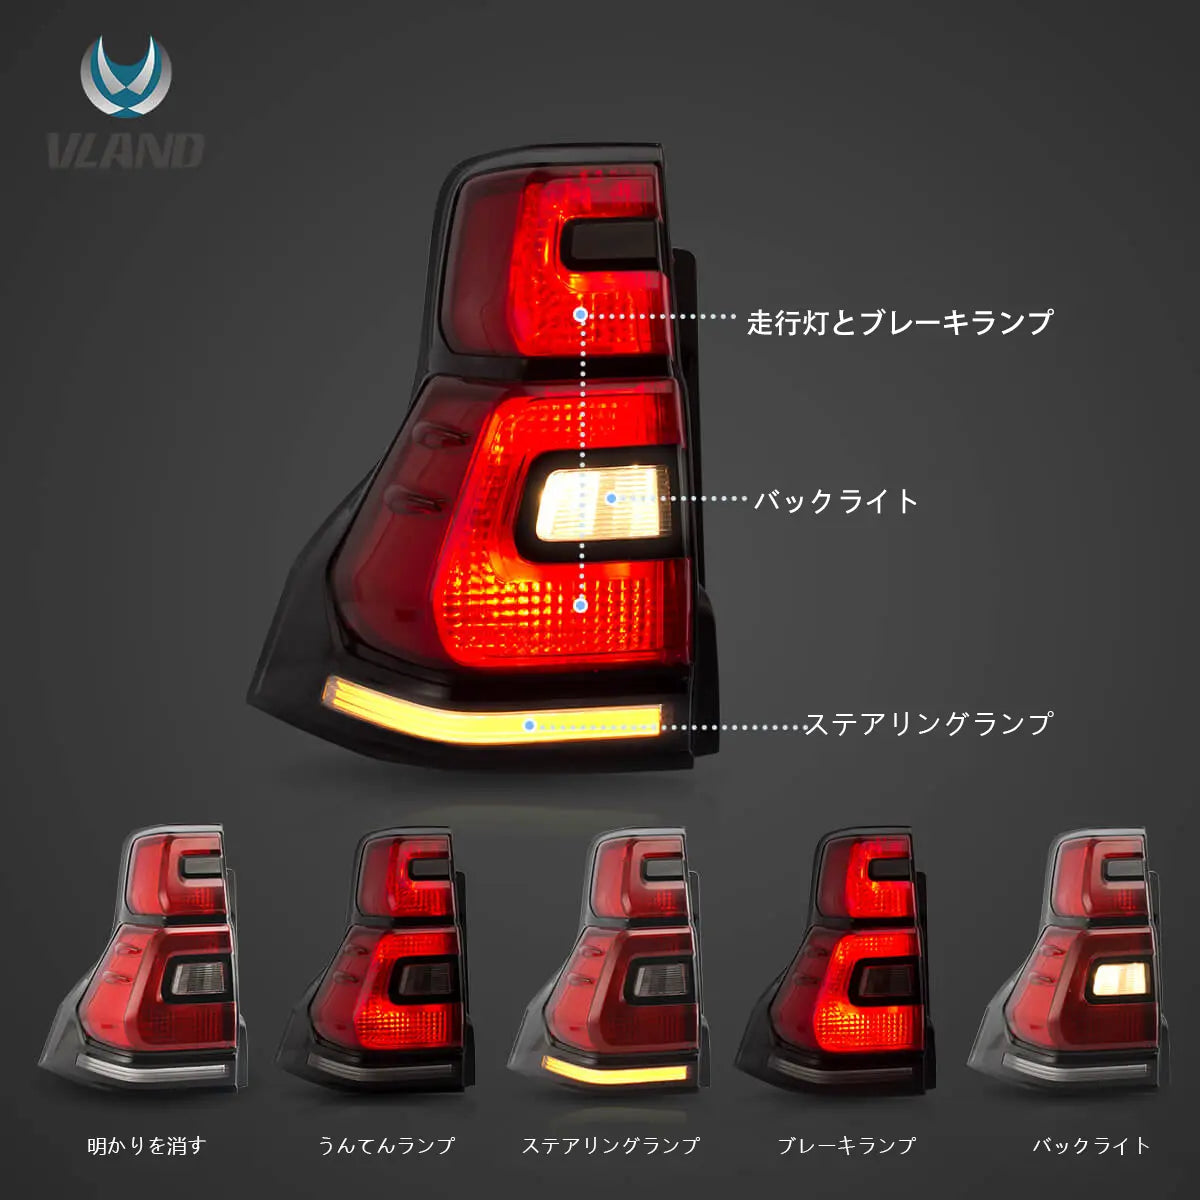 10-16 Toyota Land Cruiser Prado 4th Gen Vland LED Tail Light with Sequential Turn Signal Red